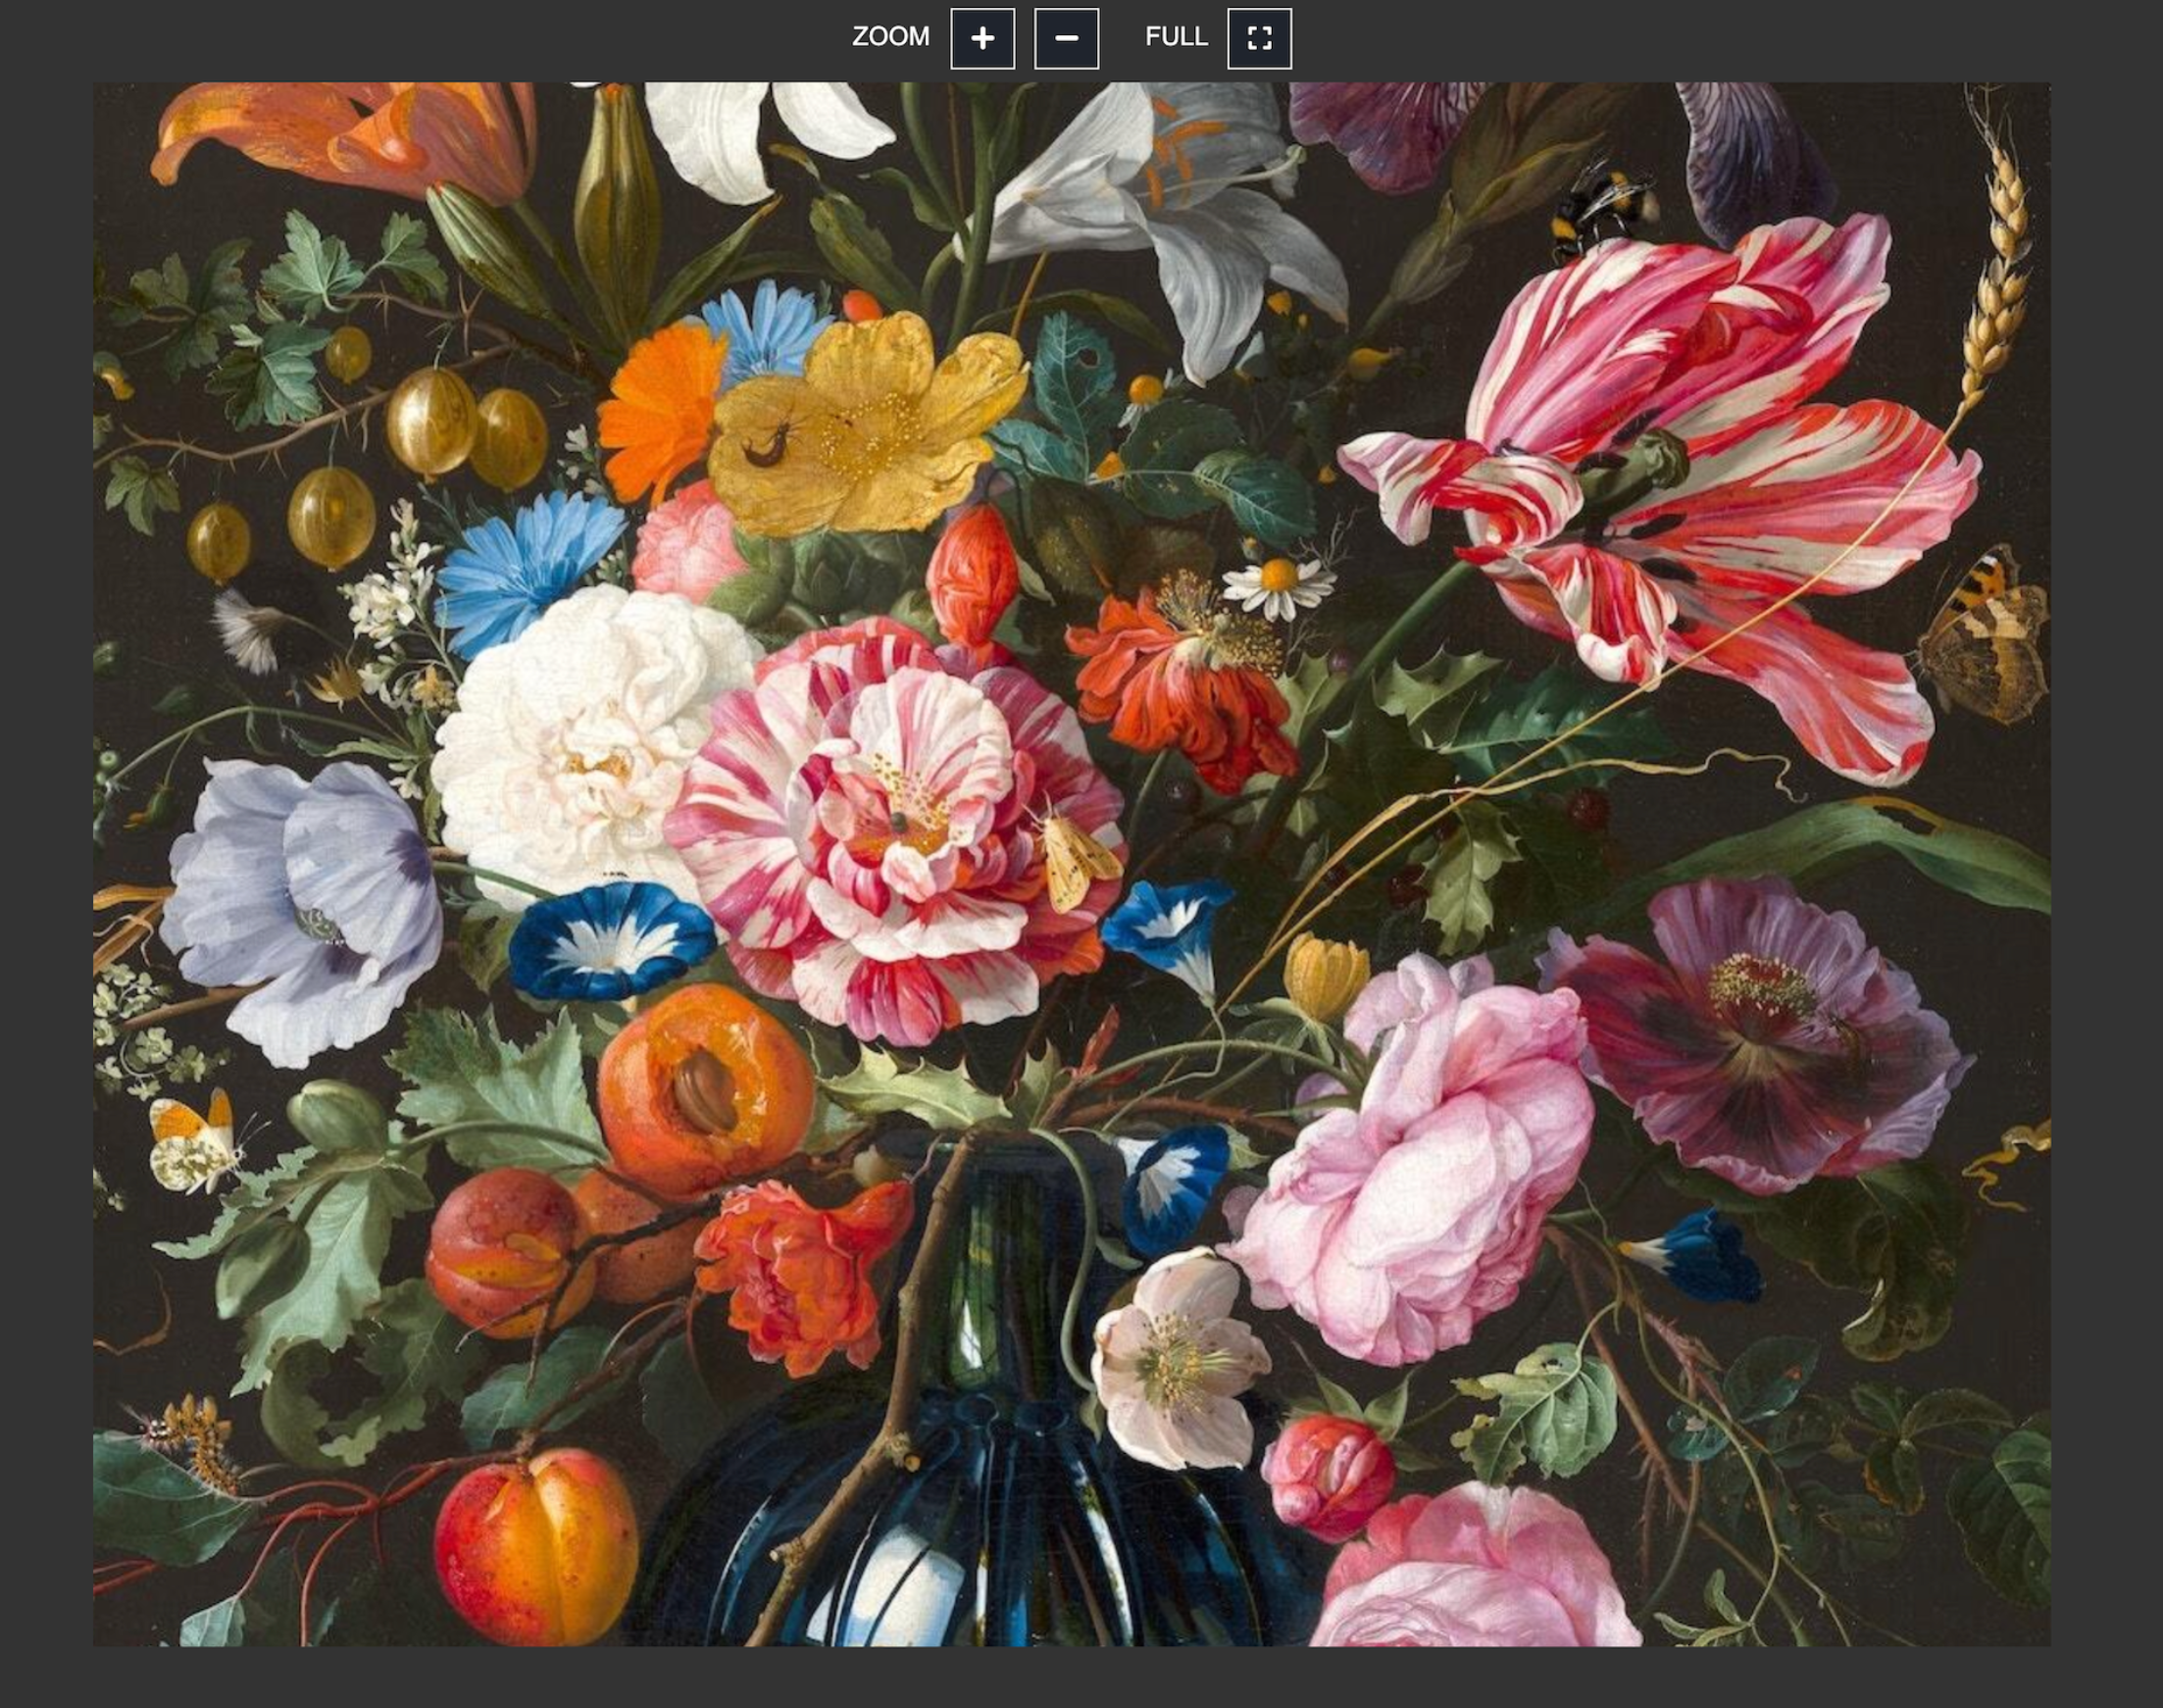 painting of a vase with colorful flowers and fruit, image is zoomed in to show added detail